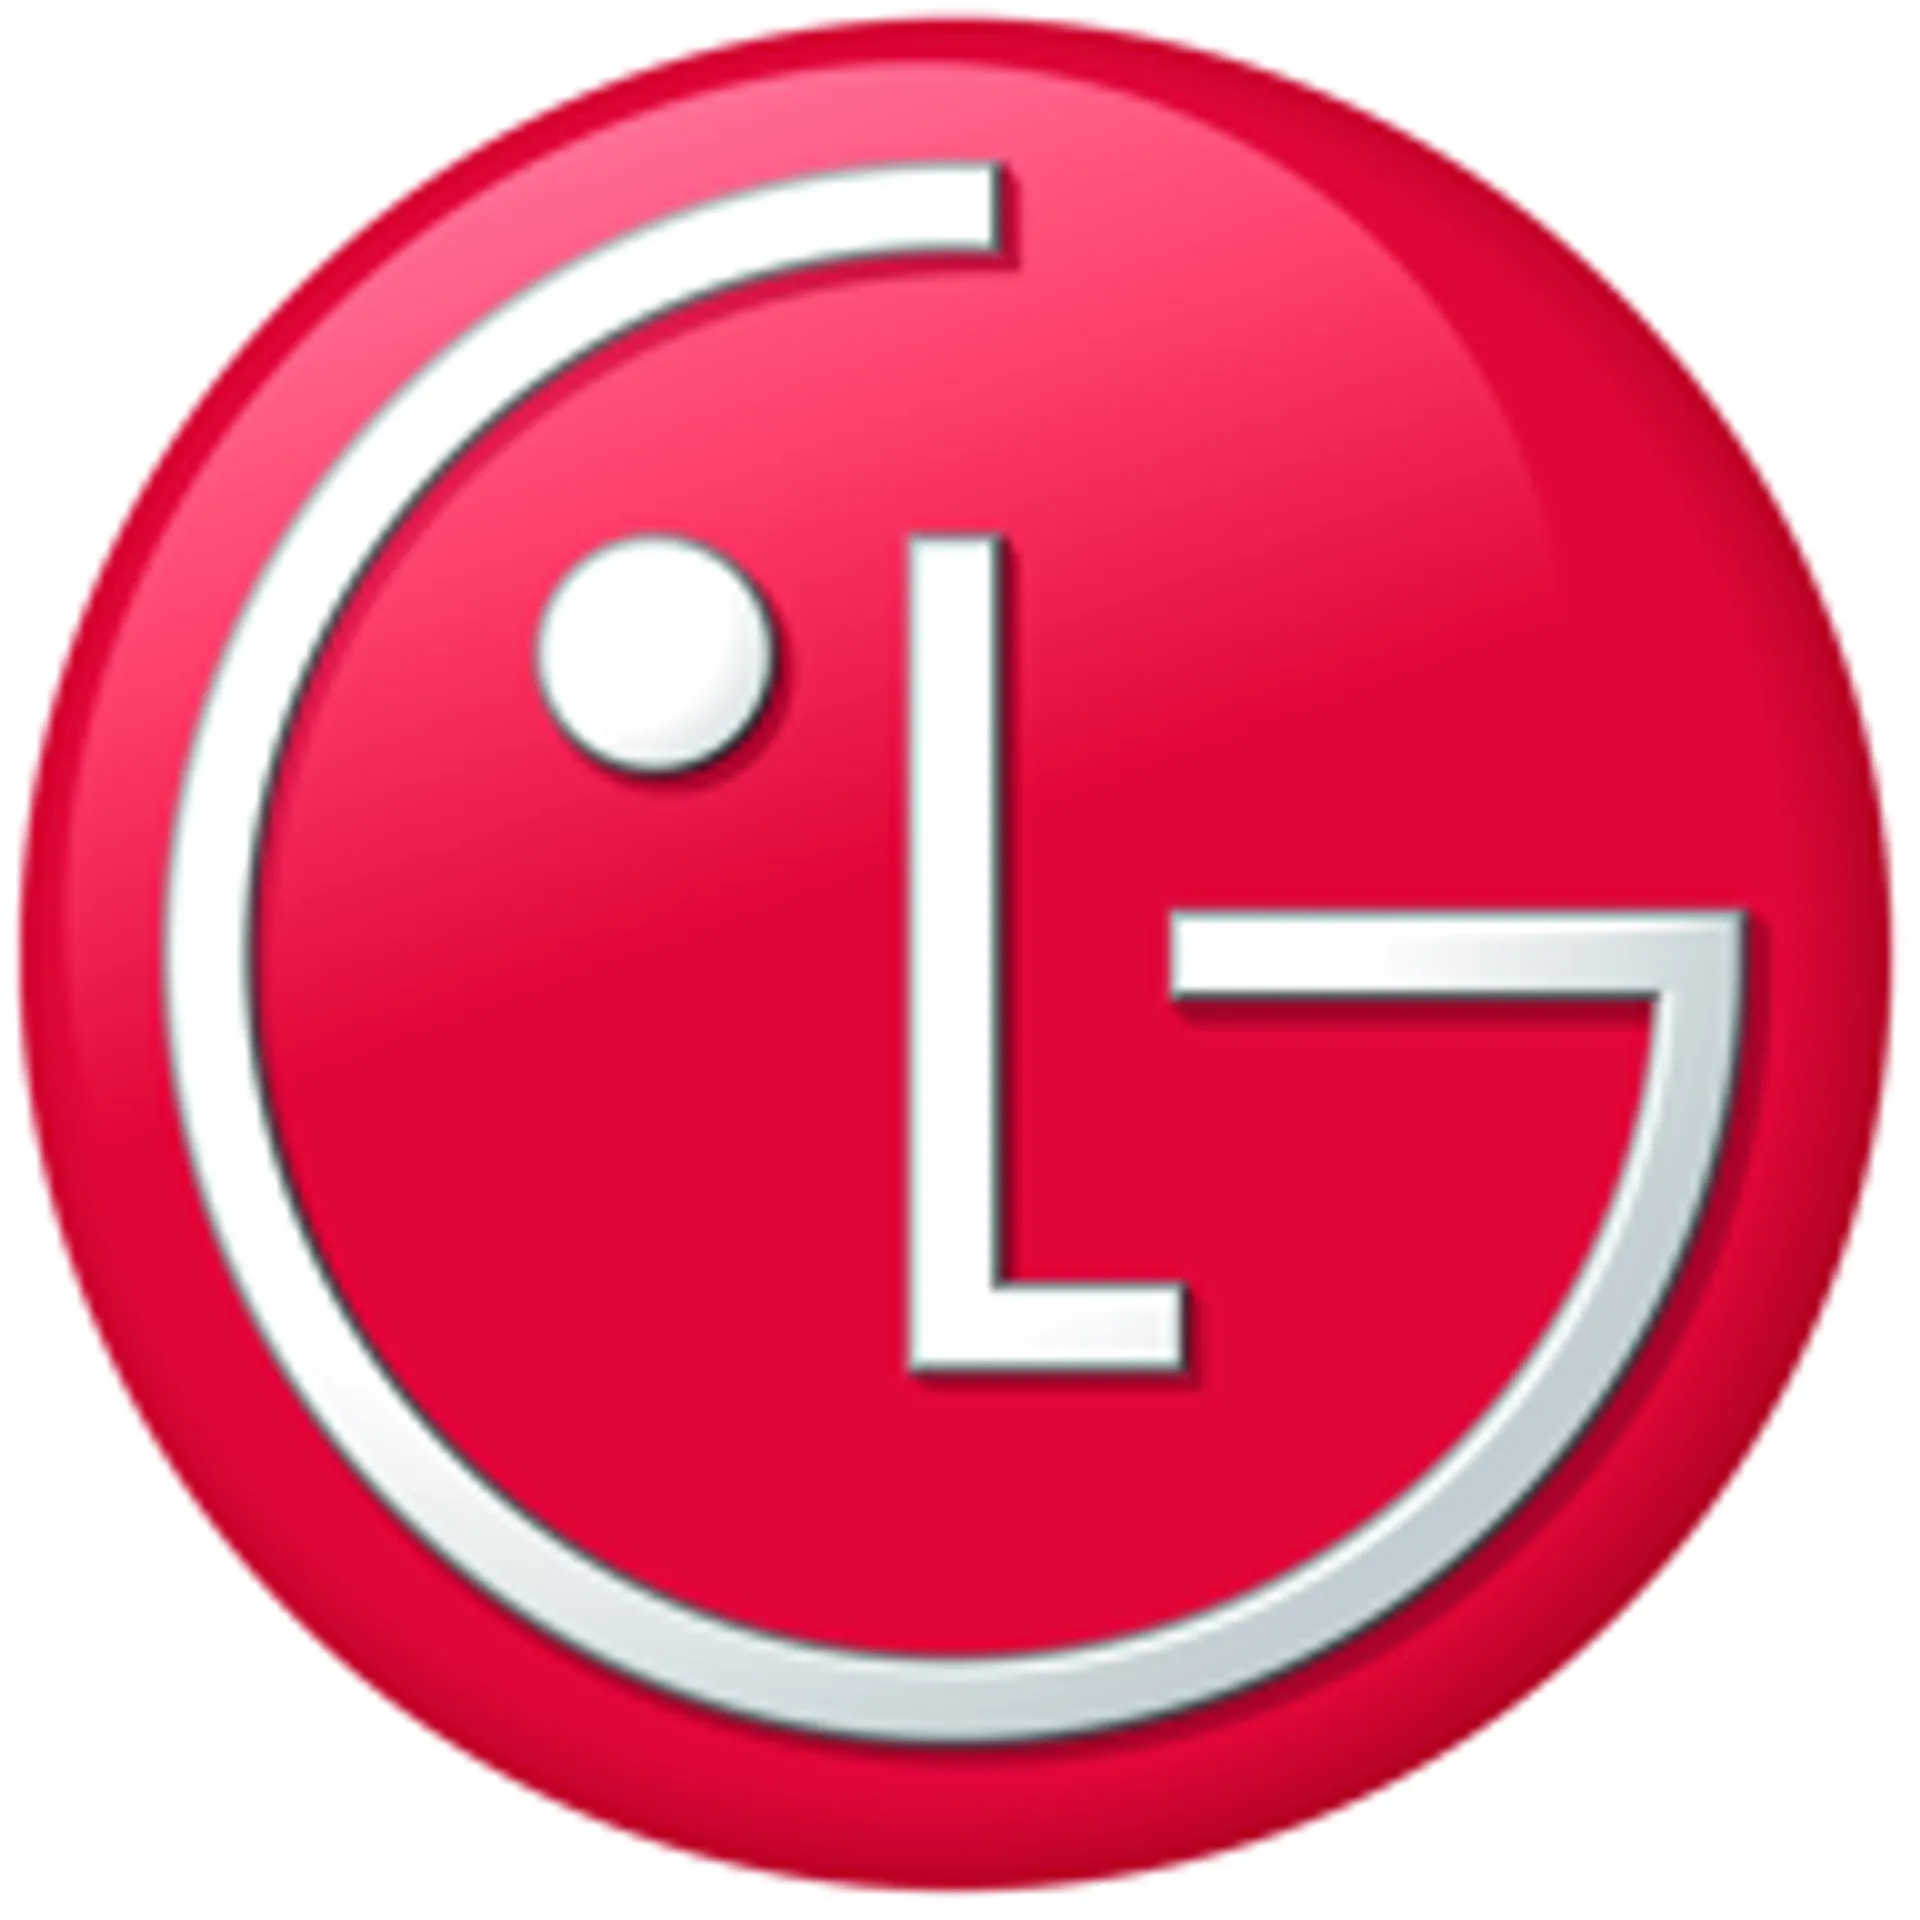 LG logo. Current weekly ad